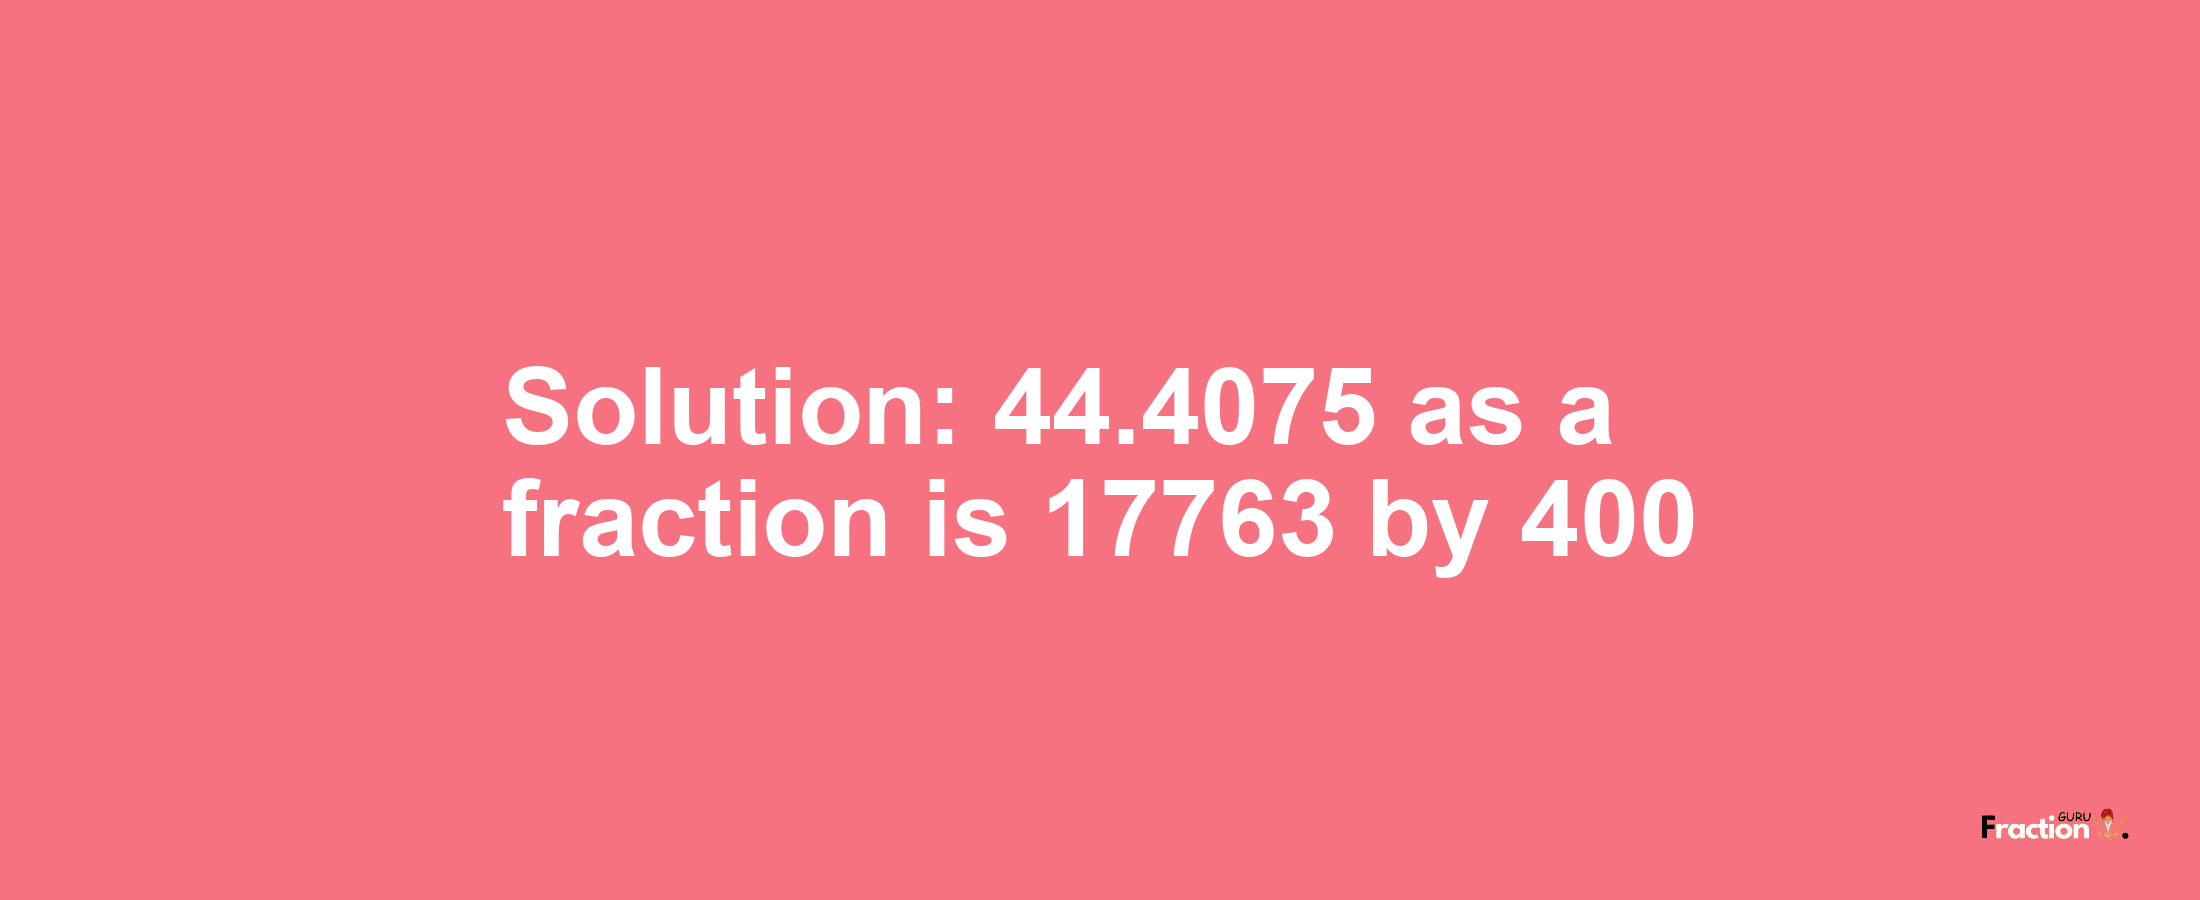 Solution:44.4075 as a fraction is 17763/400